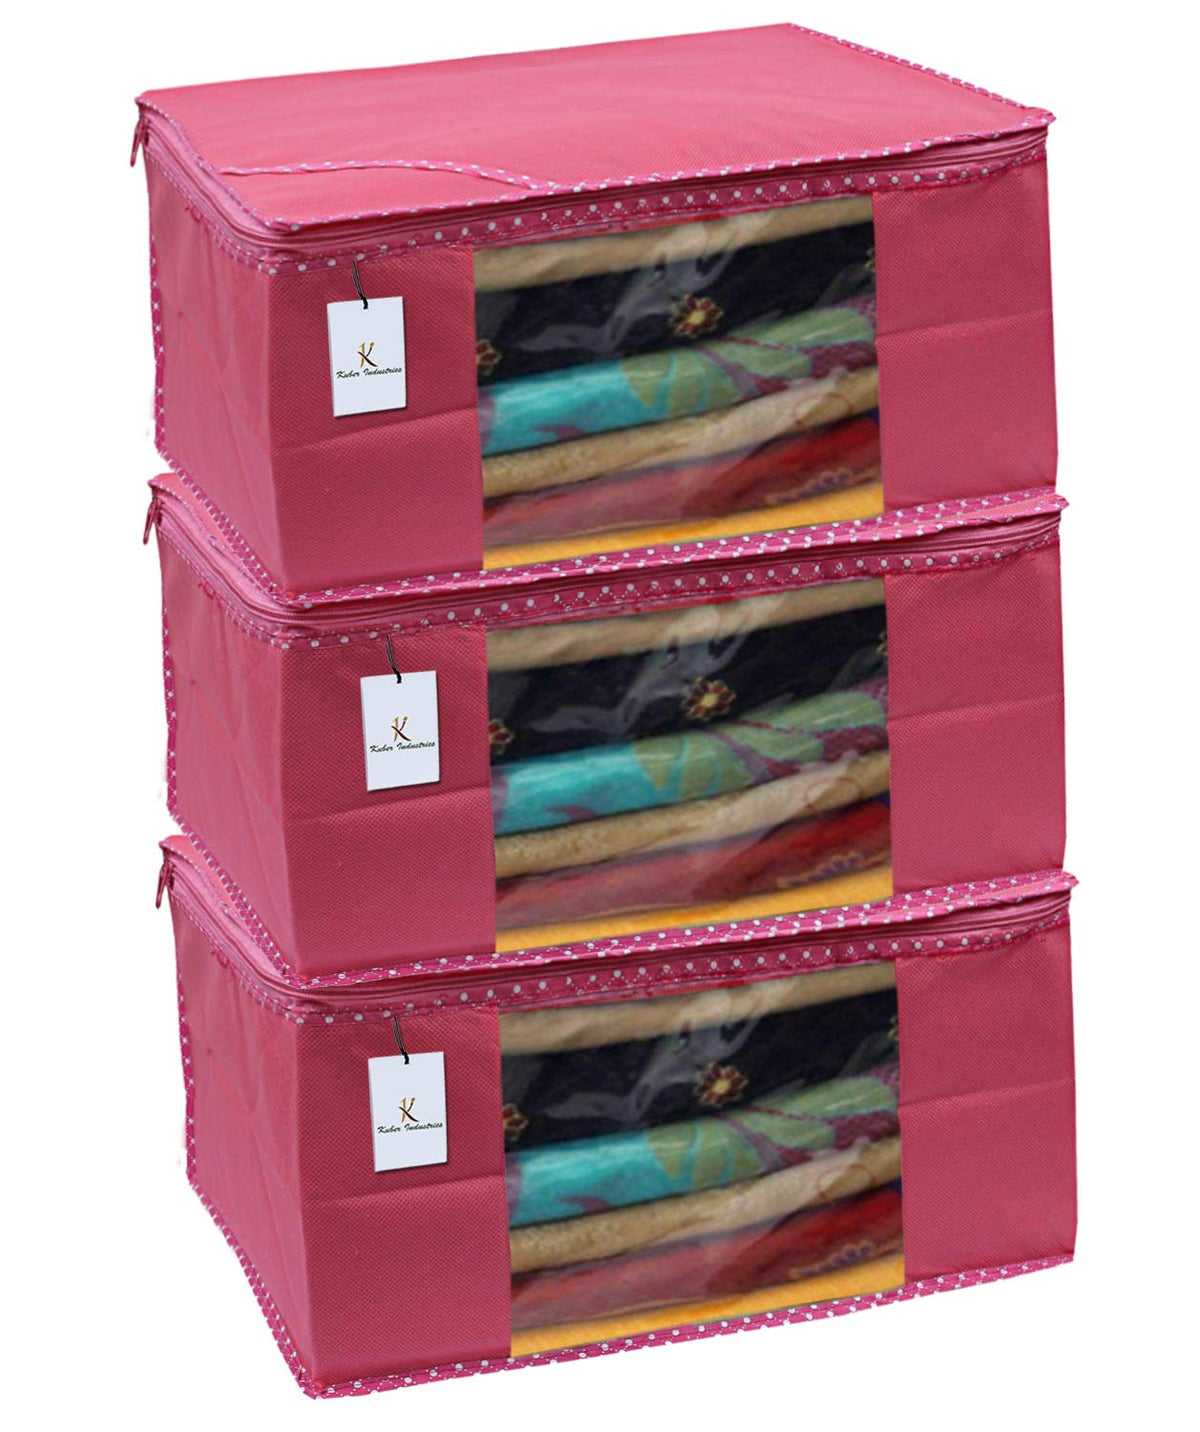 Kuber Industries 3 Piece Non Woven Saree Cover Set, Pink,Large Size -CTKTC6408